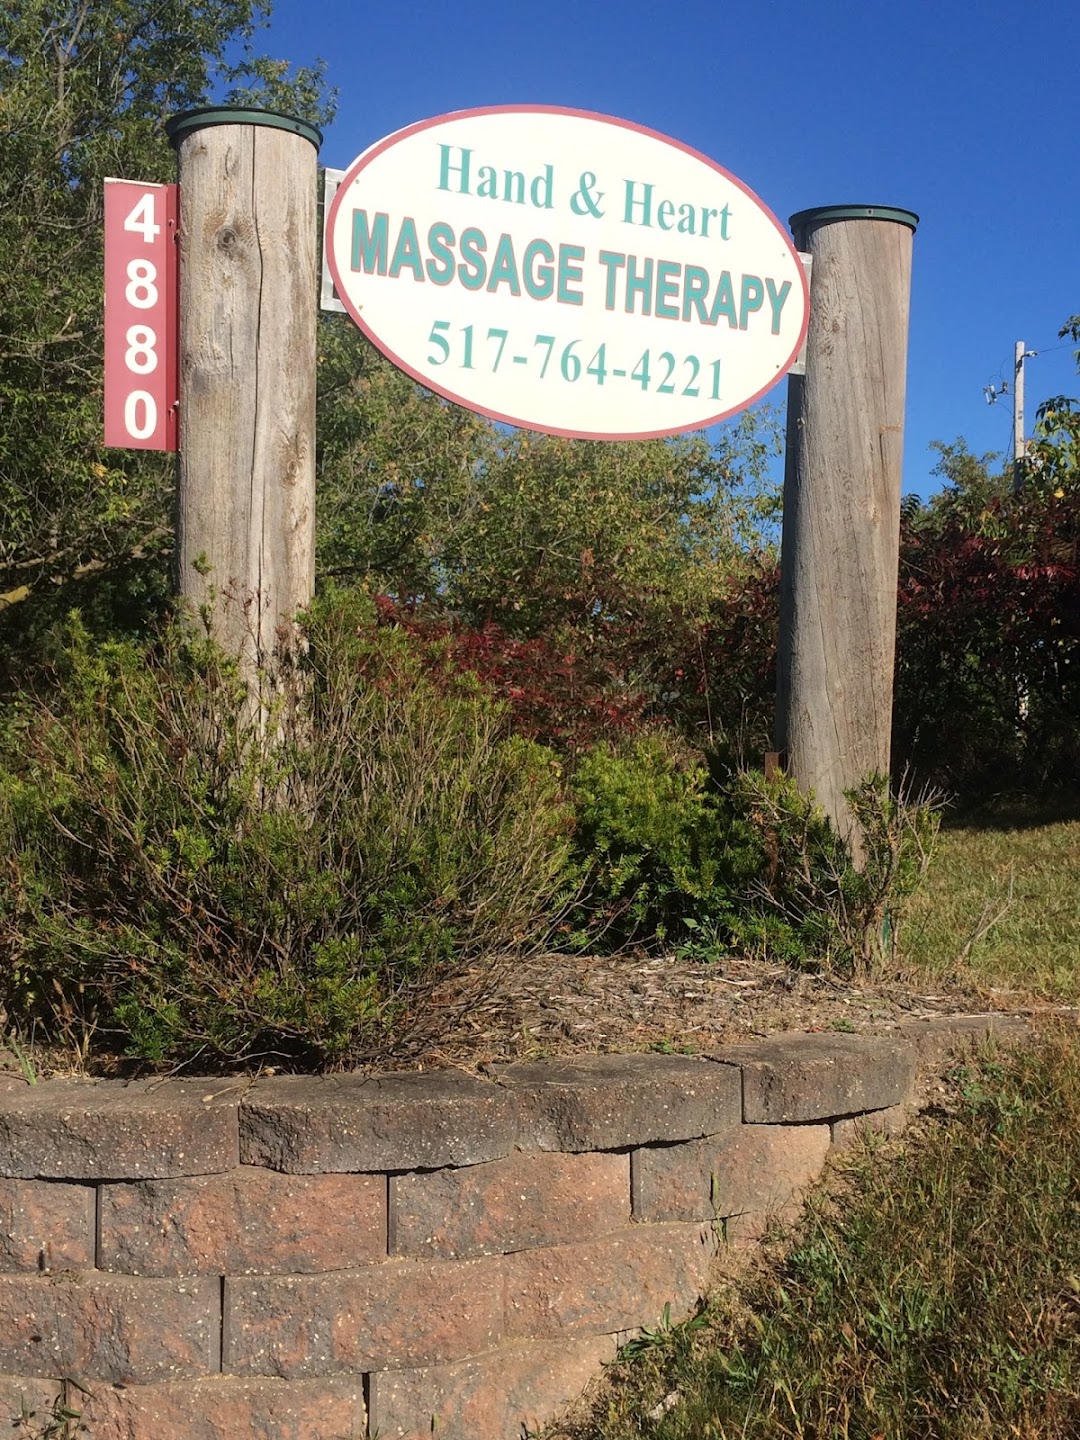 Hand & Heart Massage Therapy